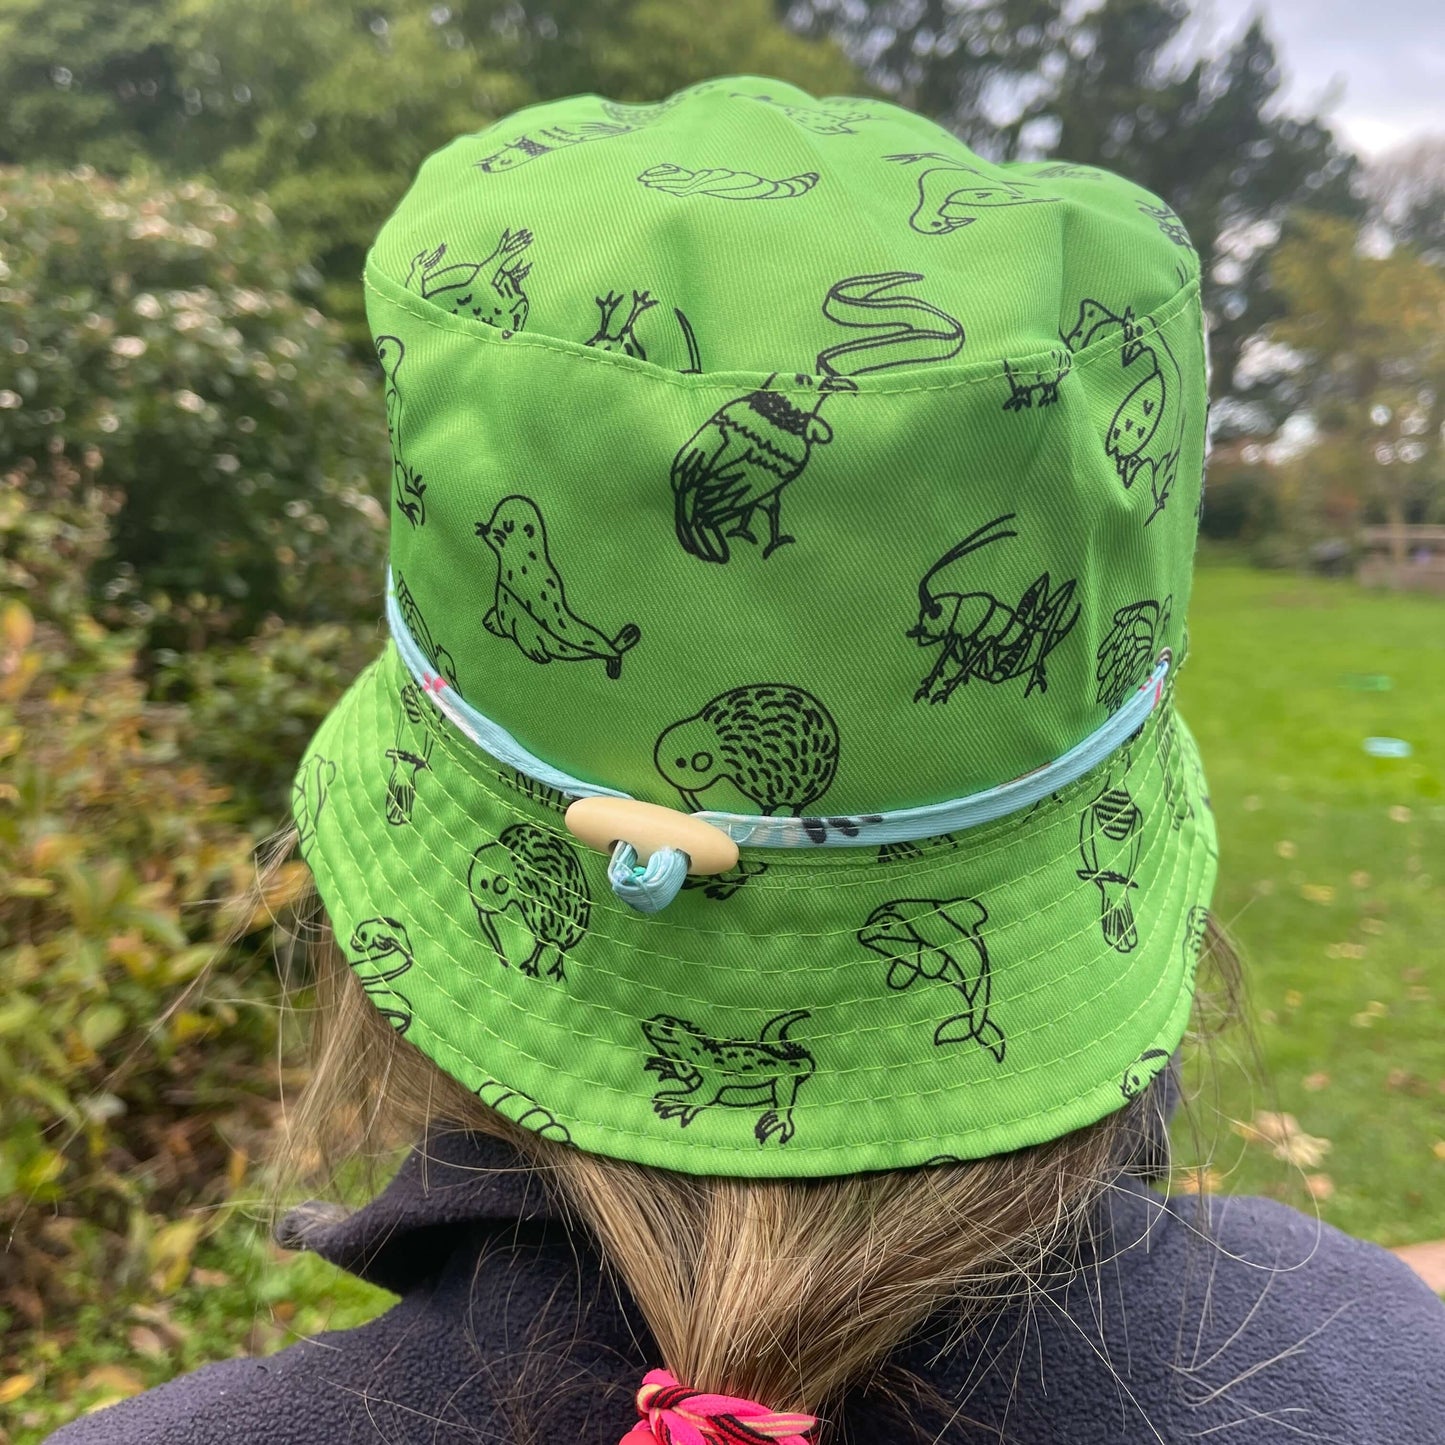 Girl wearing a Bright green bucket hat with black outlines of Native New Zealand animals.